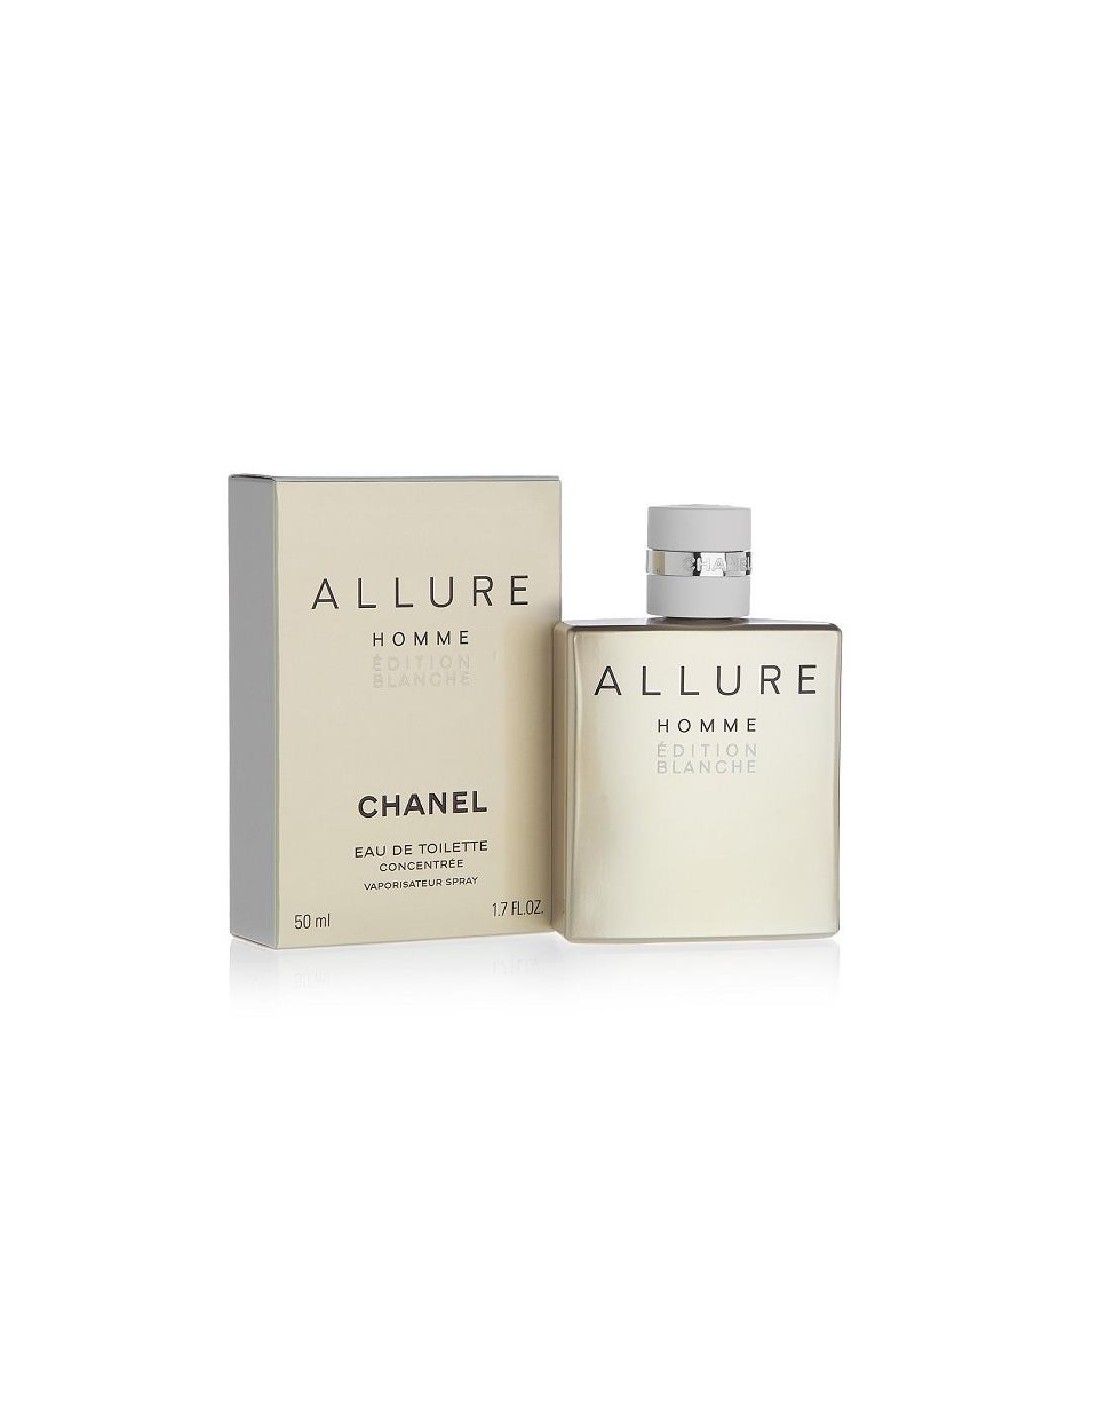 Chanel Allure Homme Edition Blanche Edt Concentree 50 Ml Vapo